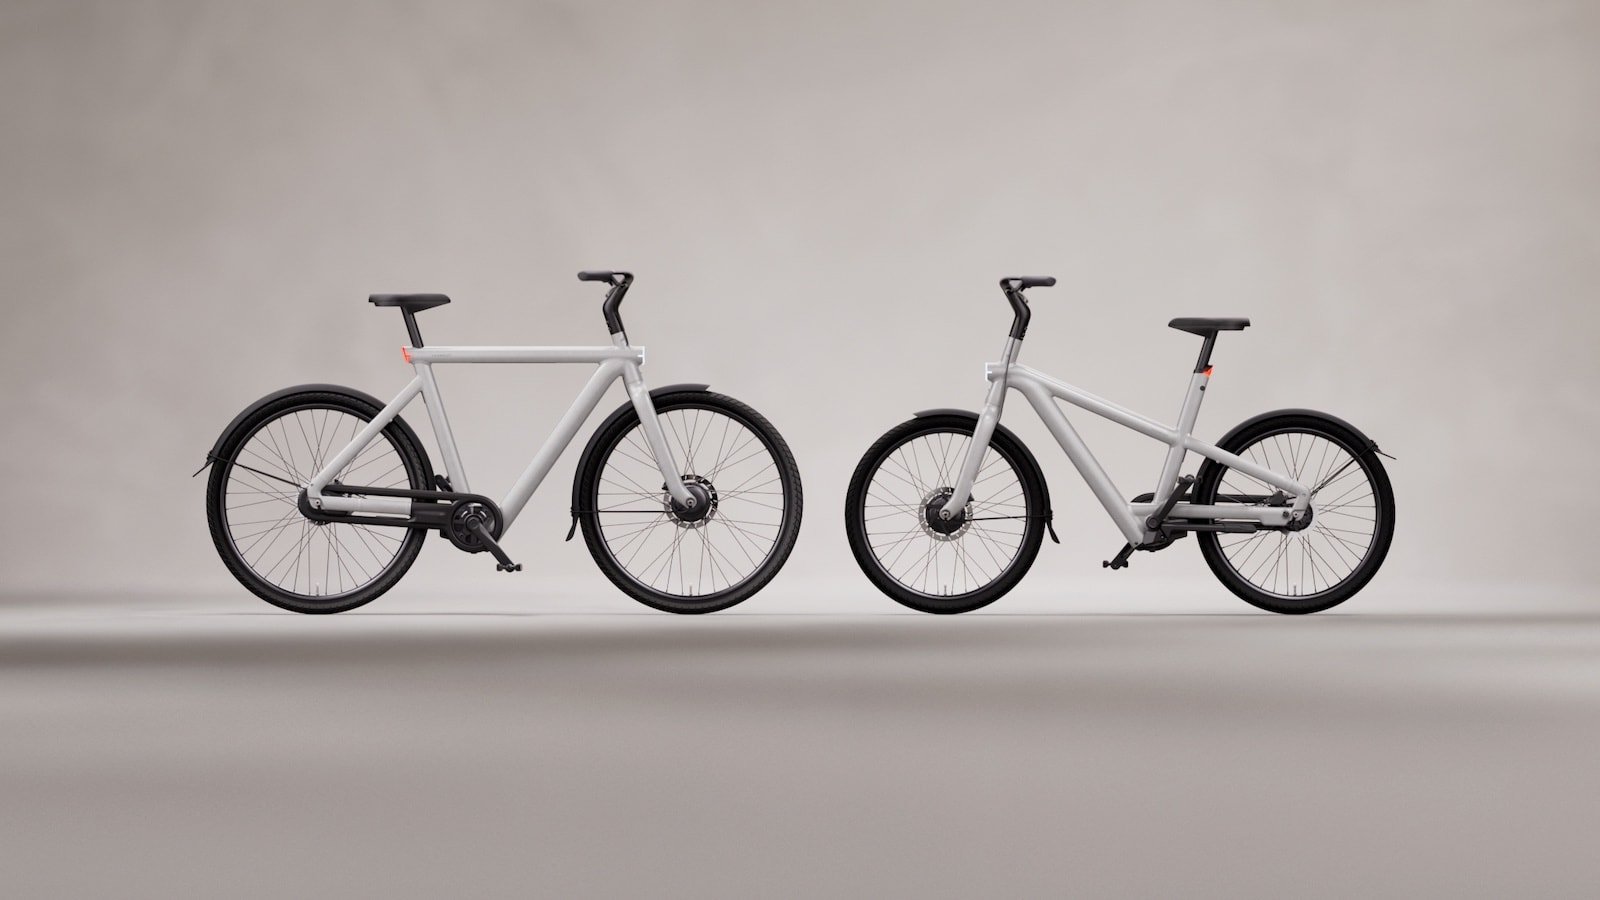 VanMoof S5 & A5 next-gen eBikes offer a more accessible ride with cargo-carrying options